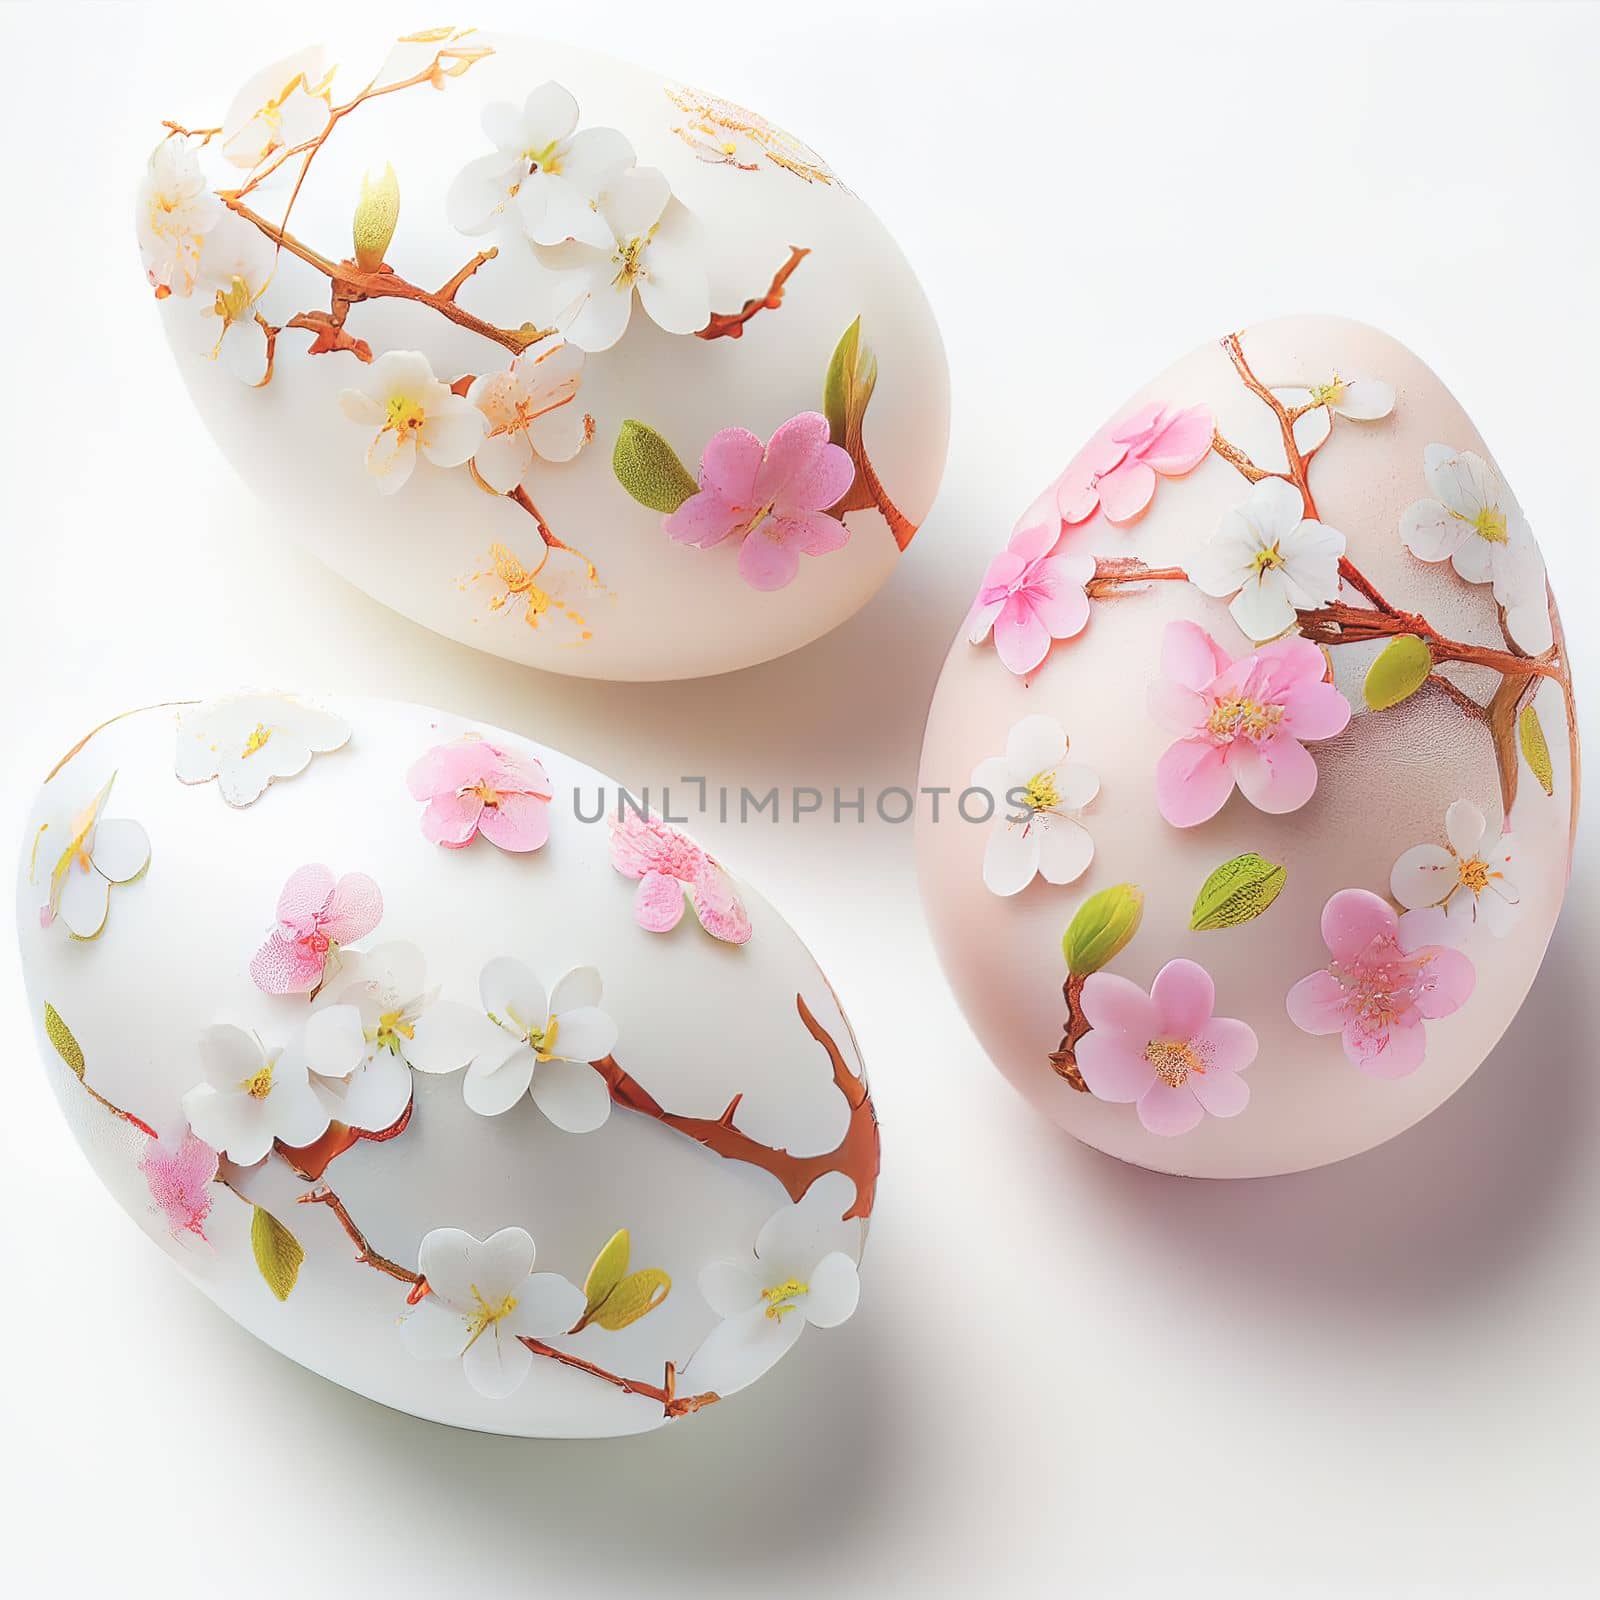 Colorful Easter eggs with cherry blossoms on white background. Design for Easter day banner. 3D illustration